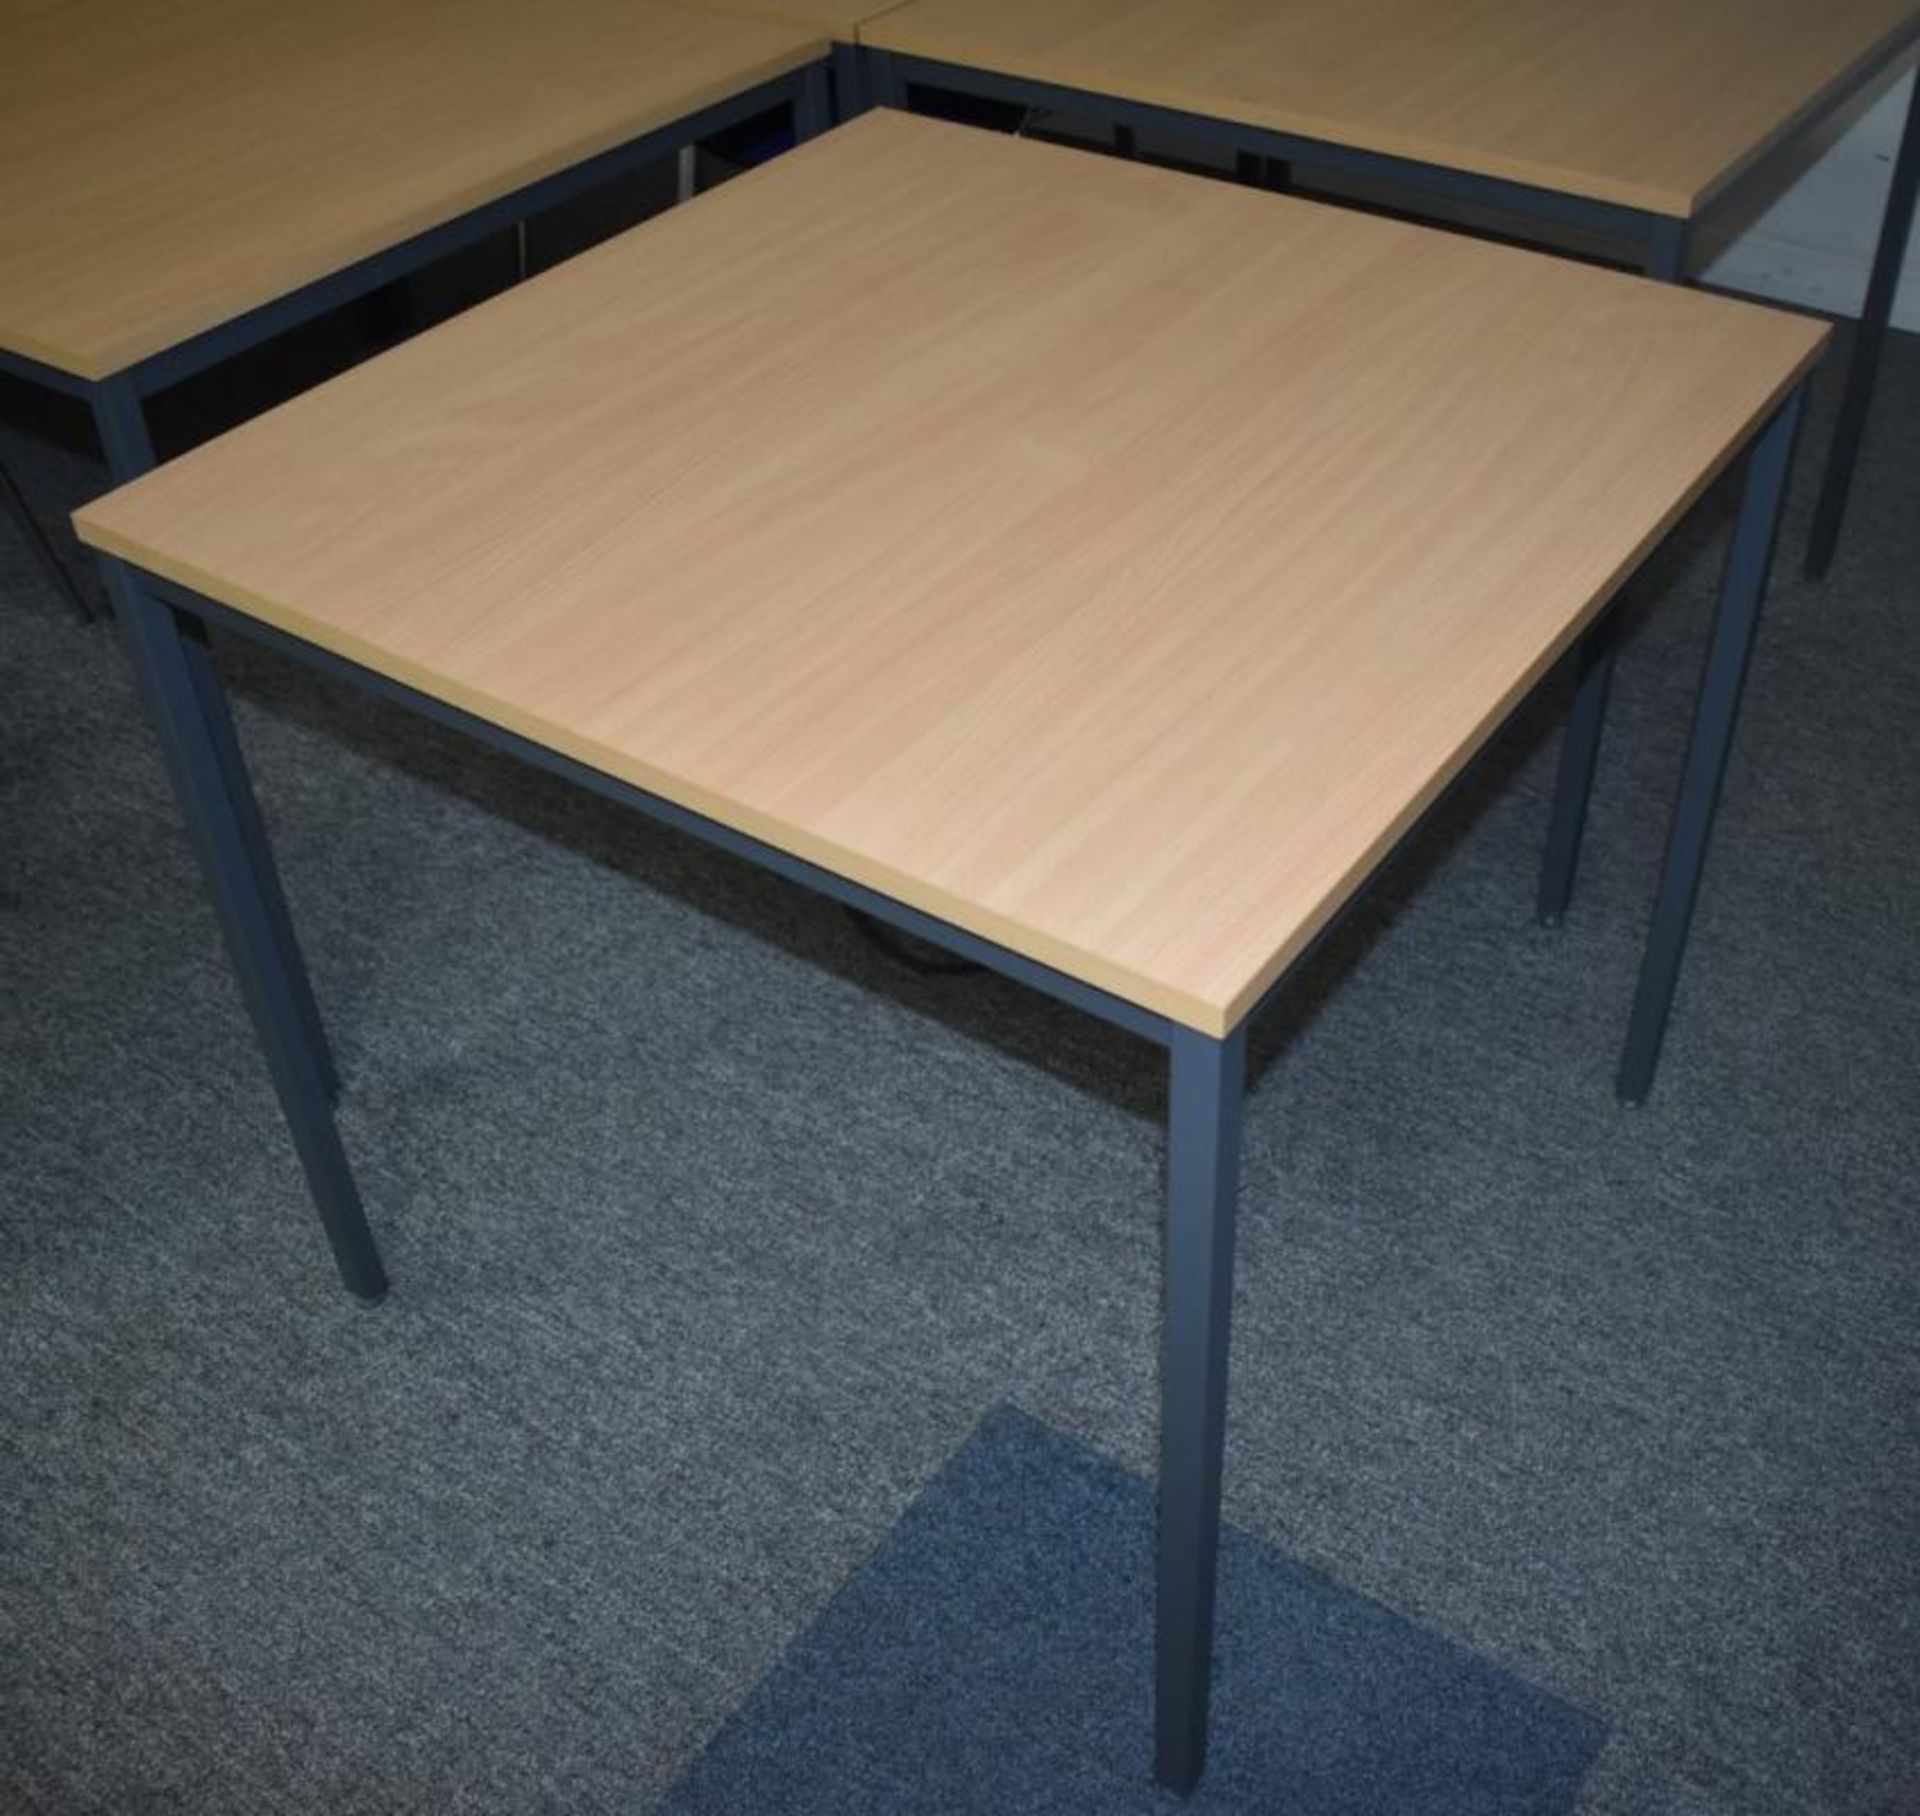 7 x Matching Office Tables With Beech Tops and Dark Grey Bases - CL490 - Location: Putney, London,